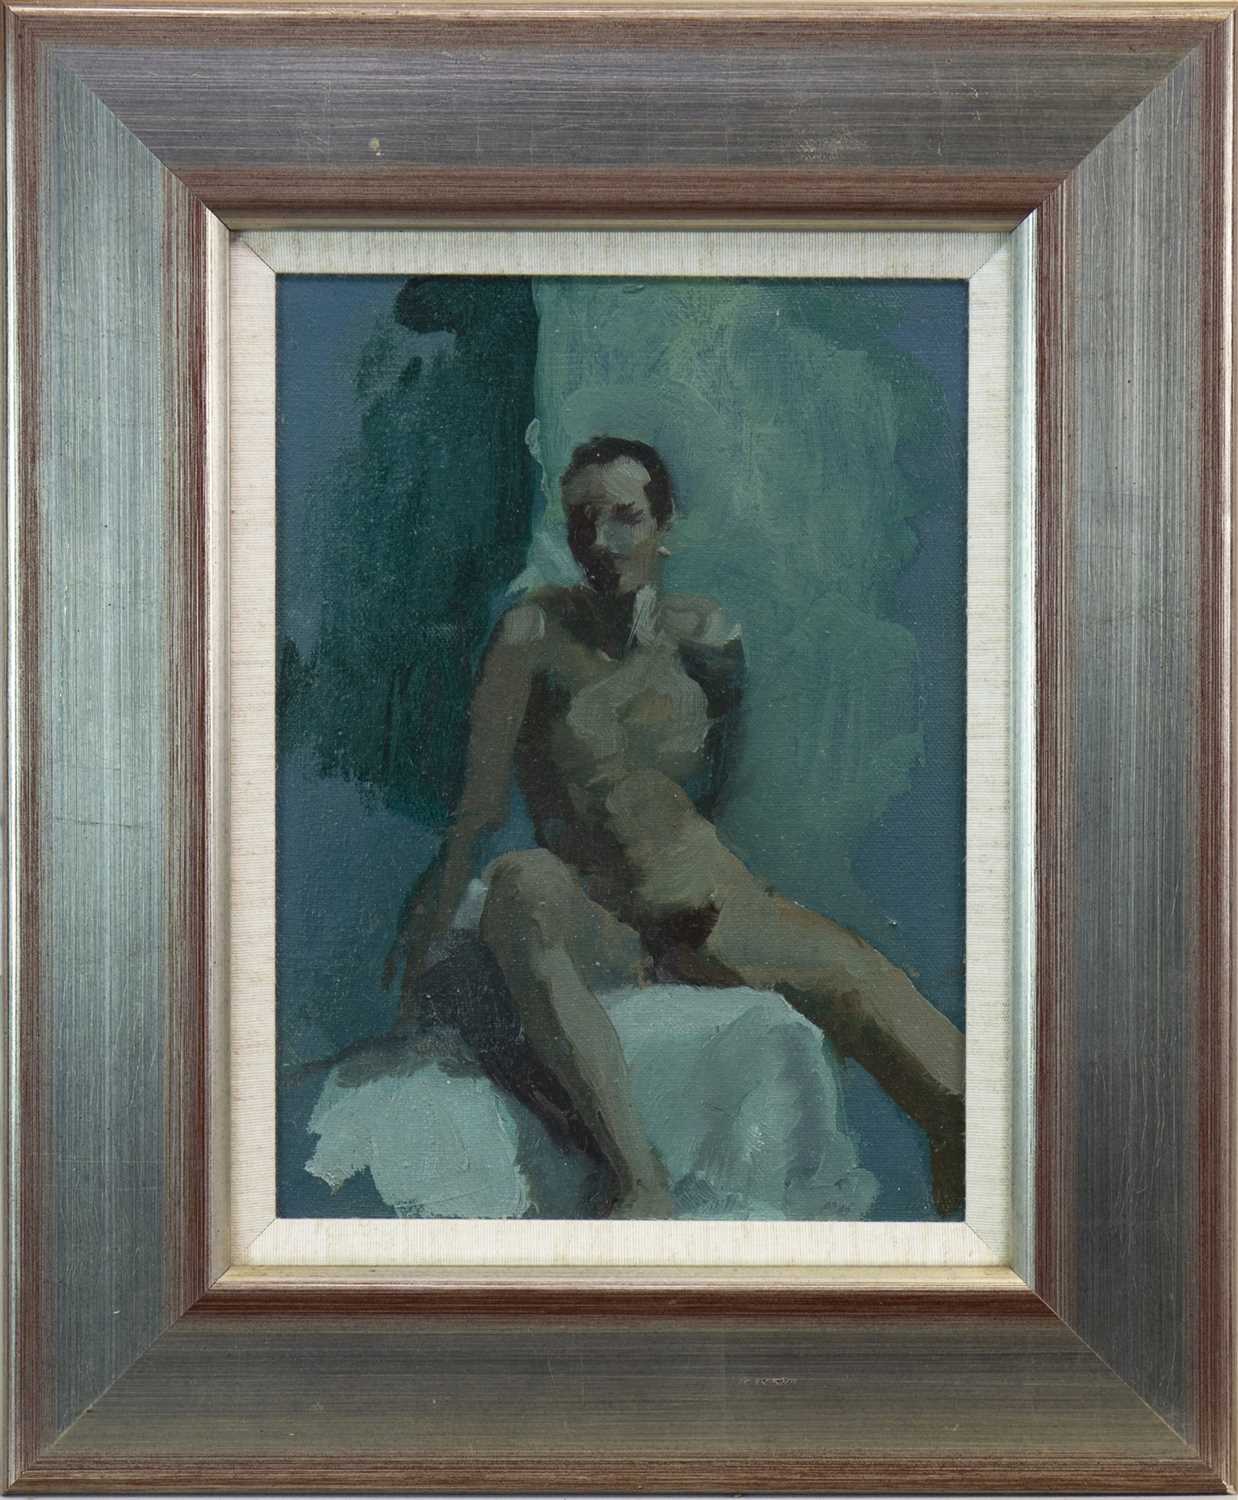 Lot 478 - NUDE STUDY IN BLUE, AN OIL